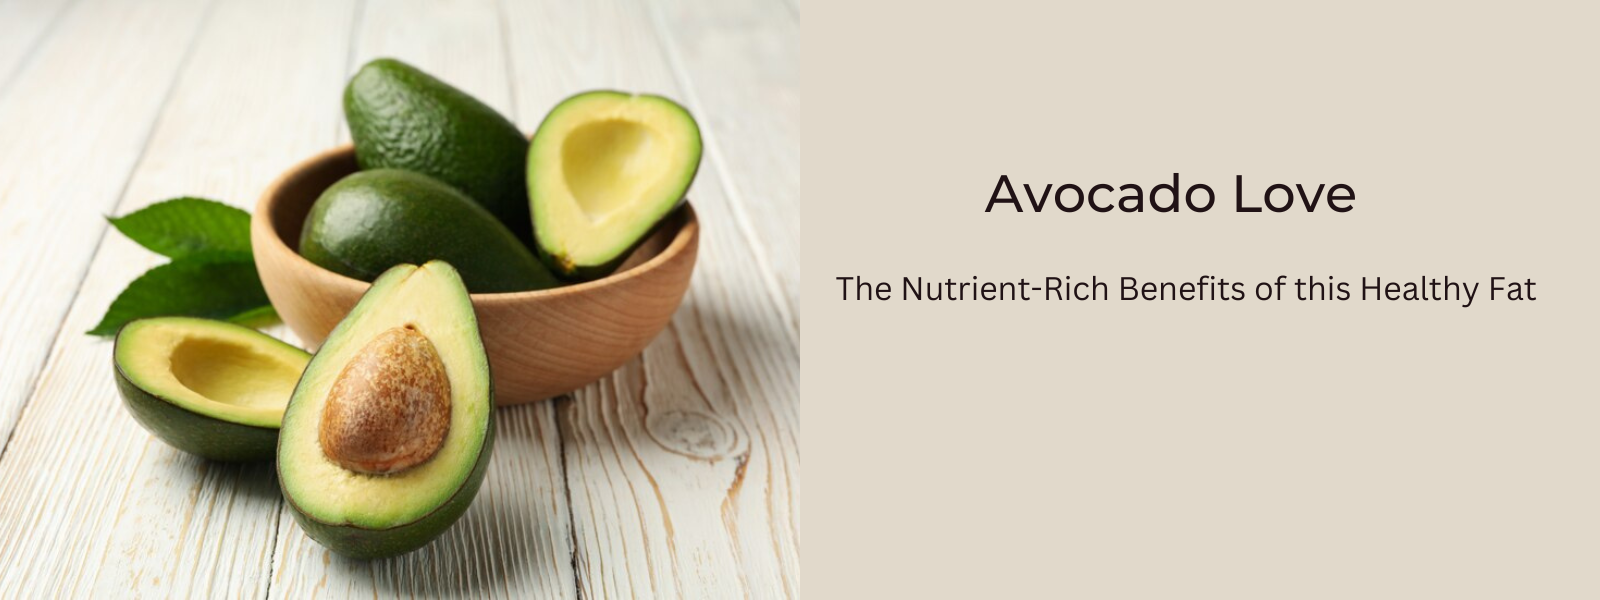 Avocado Love: The Nutrient-Rich Benefits of this Healthy Fat